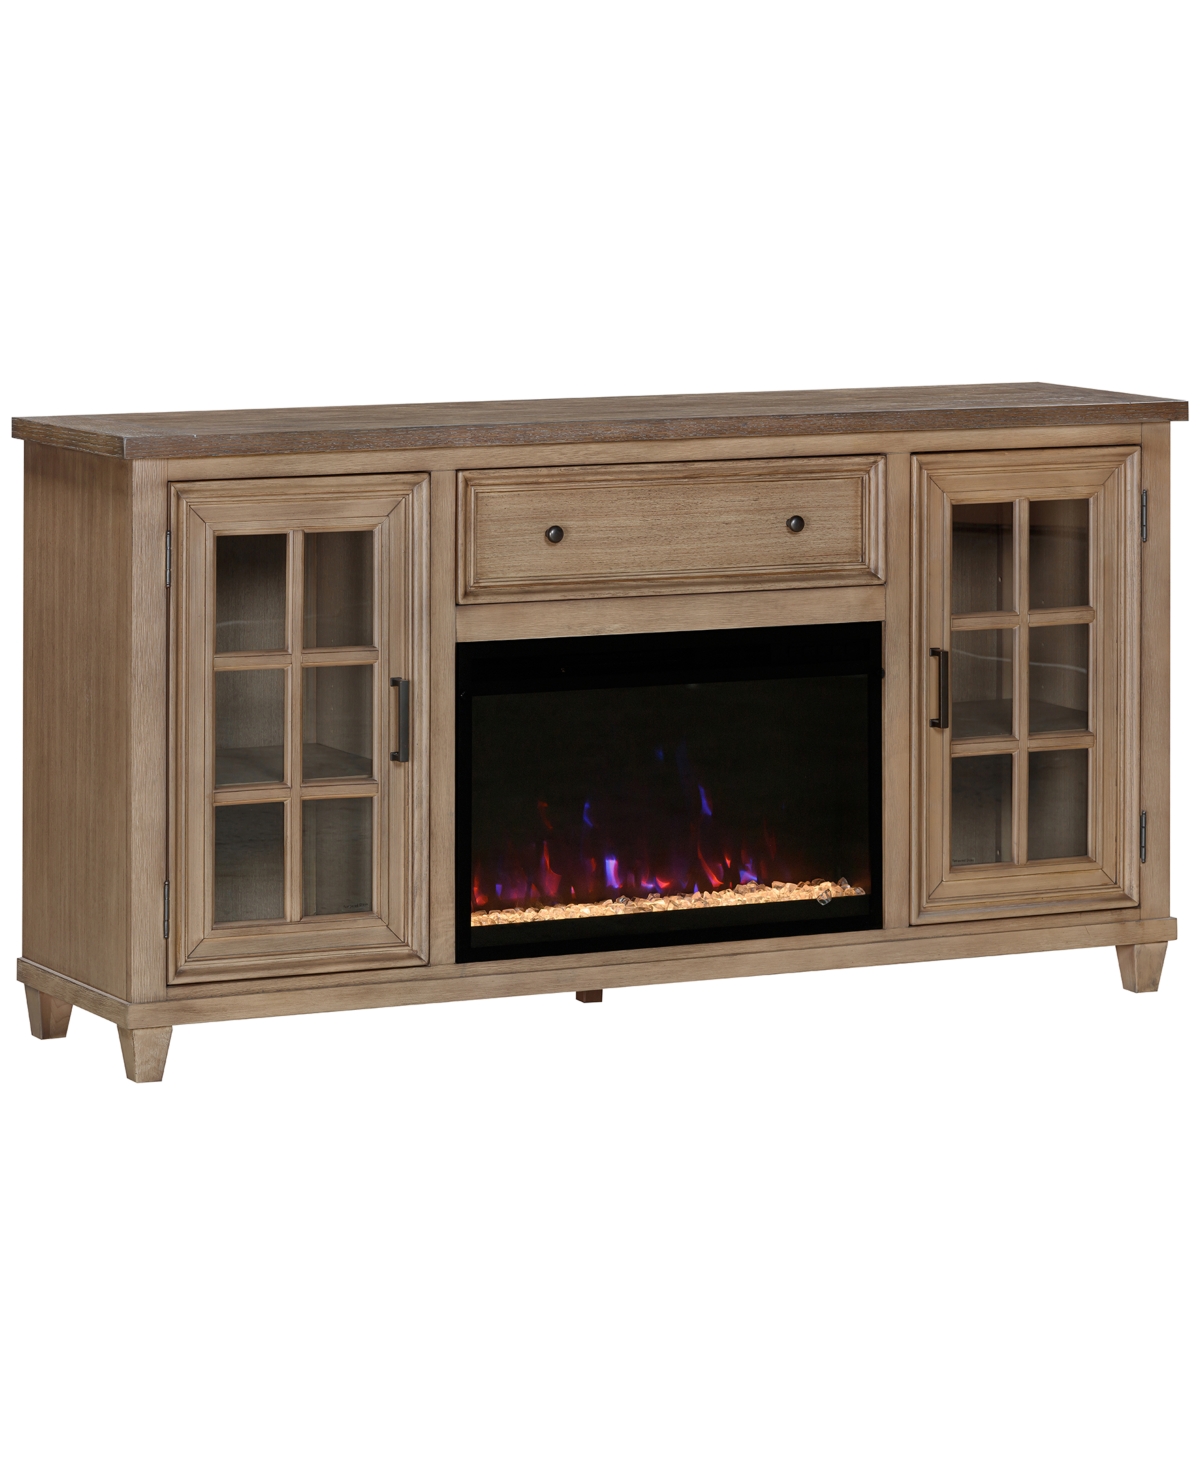 Macy's 65" Dawnwood 2pc Tv Console Set (65" Console And Fireplace) In Wheat